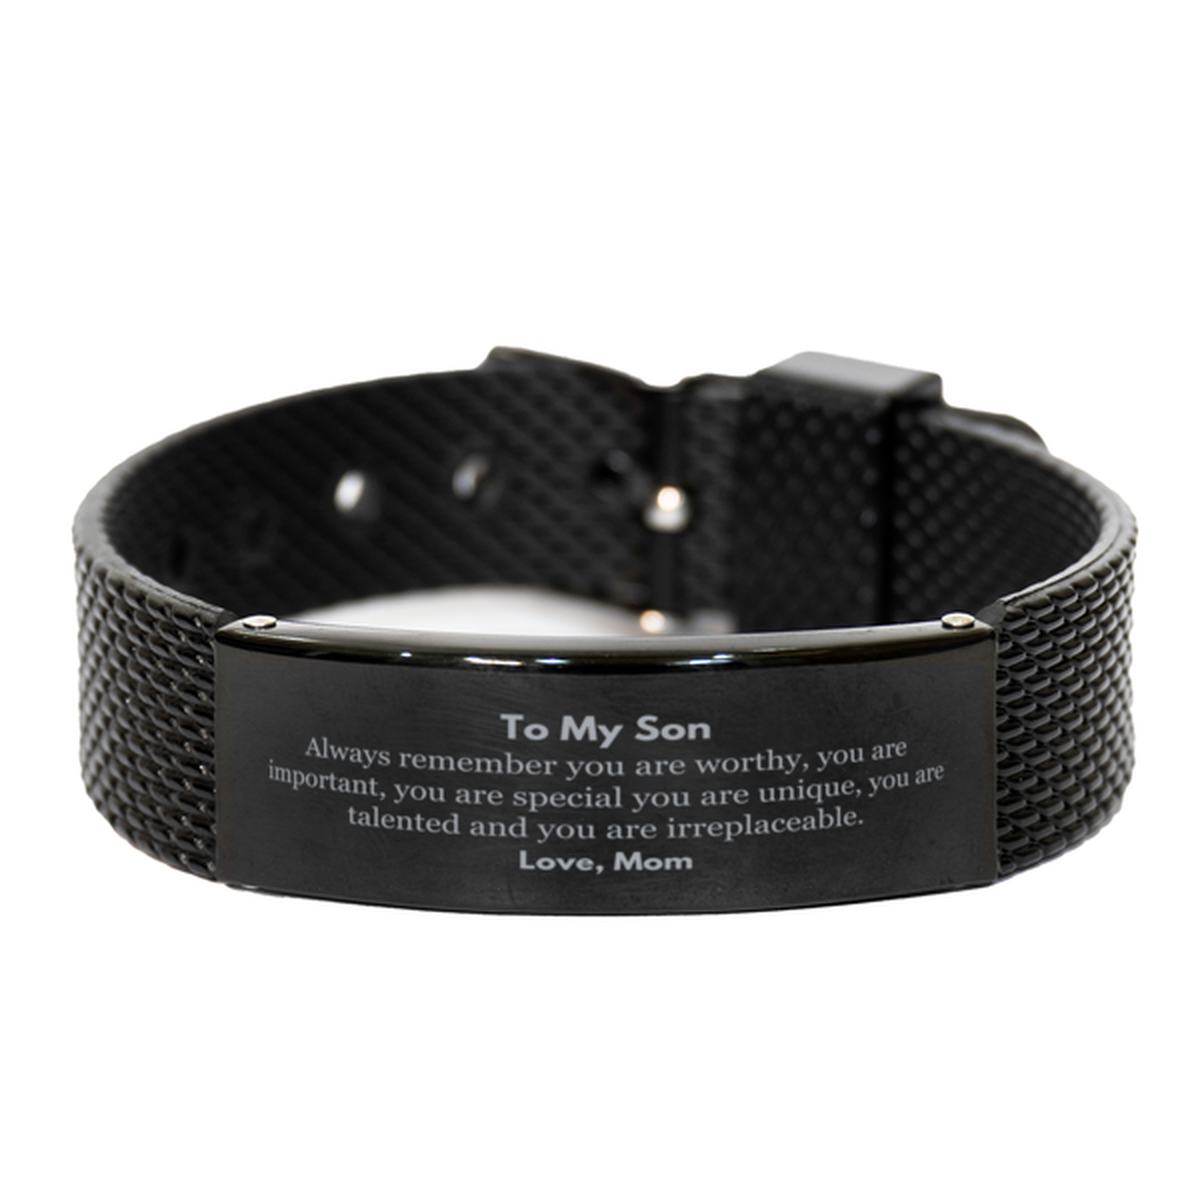 Son Birthday Gifts from Mom, Inspirational Black Shark Mesh Bracelet for Son Christmas Graduation Gifts for Son Always remember you are worthy, you are important. Love, Mom